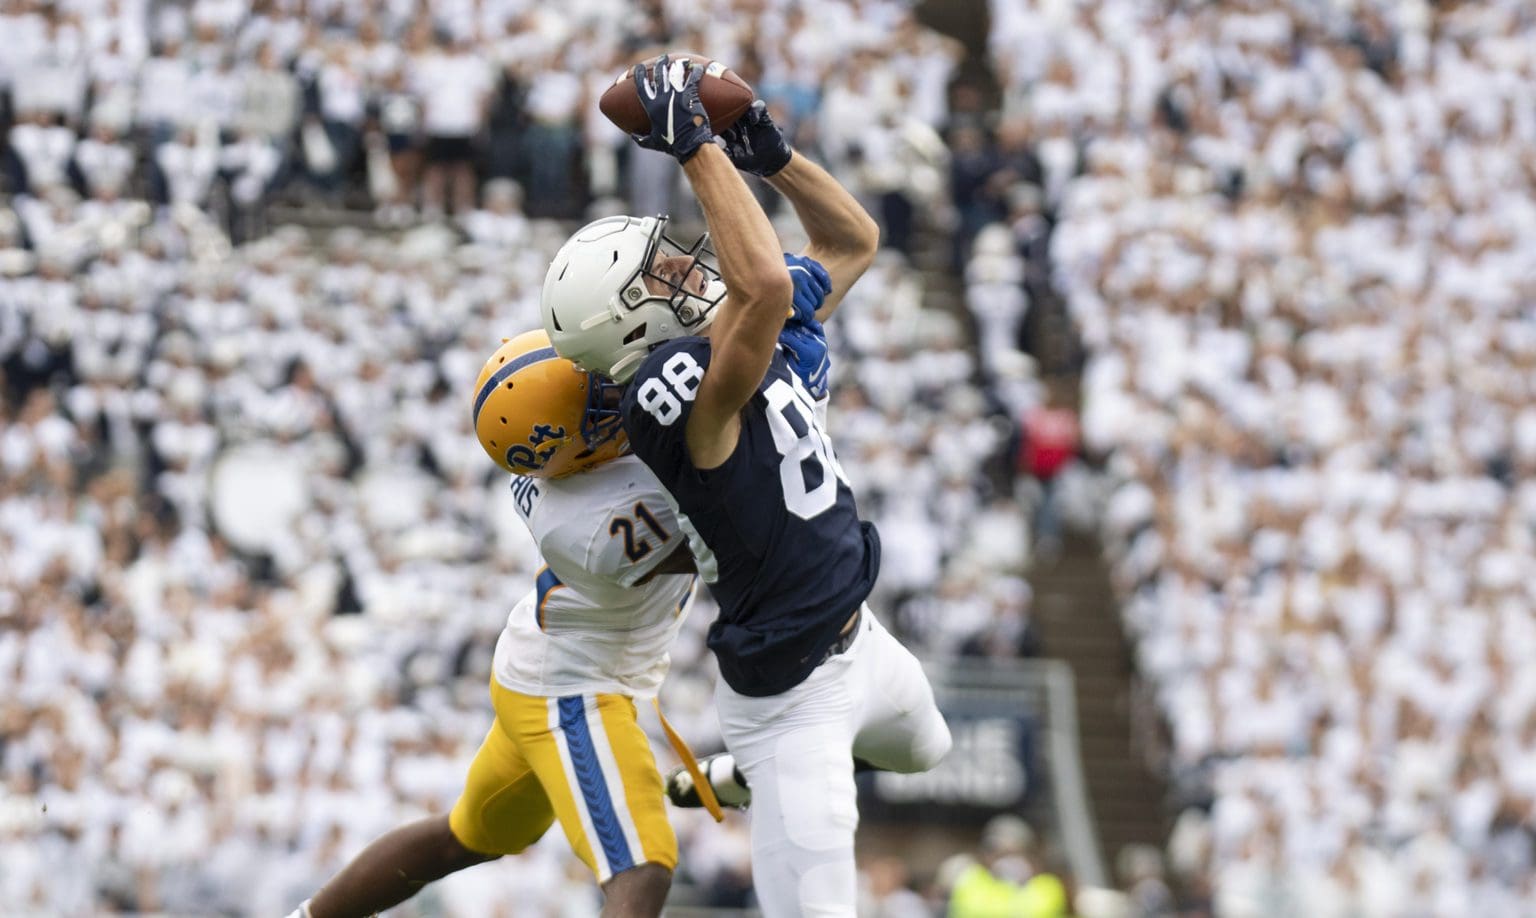 Penn State wide receiver Dan Chisena (88) attempts to haul in a pass as Pittsburgh defensive back Damarri Mathis (21) defends in the third quarter of an NCAA college football game in State College, Pa., on Saturday, Sept. 14, 2019. (AP Photo/Barry Reeger)